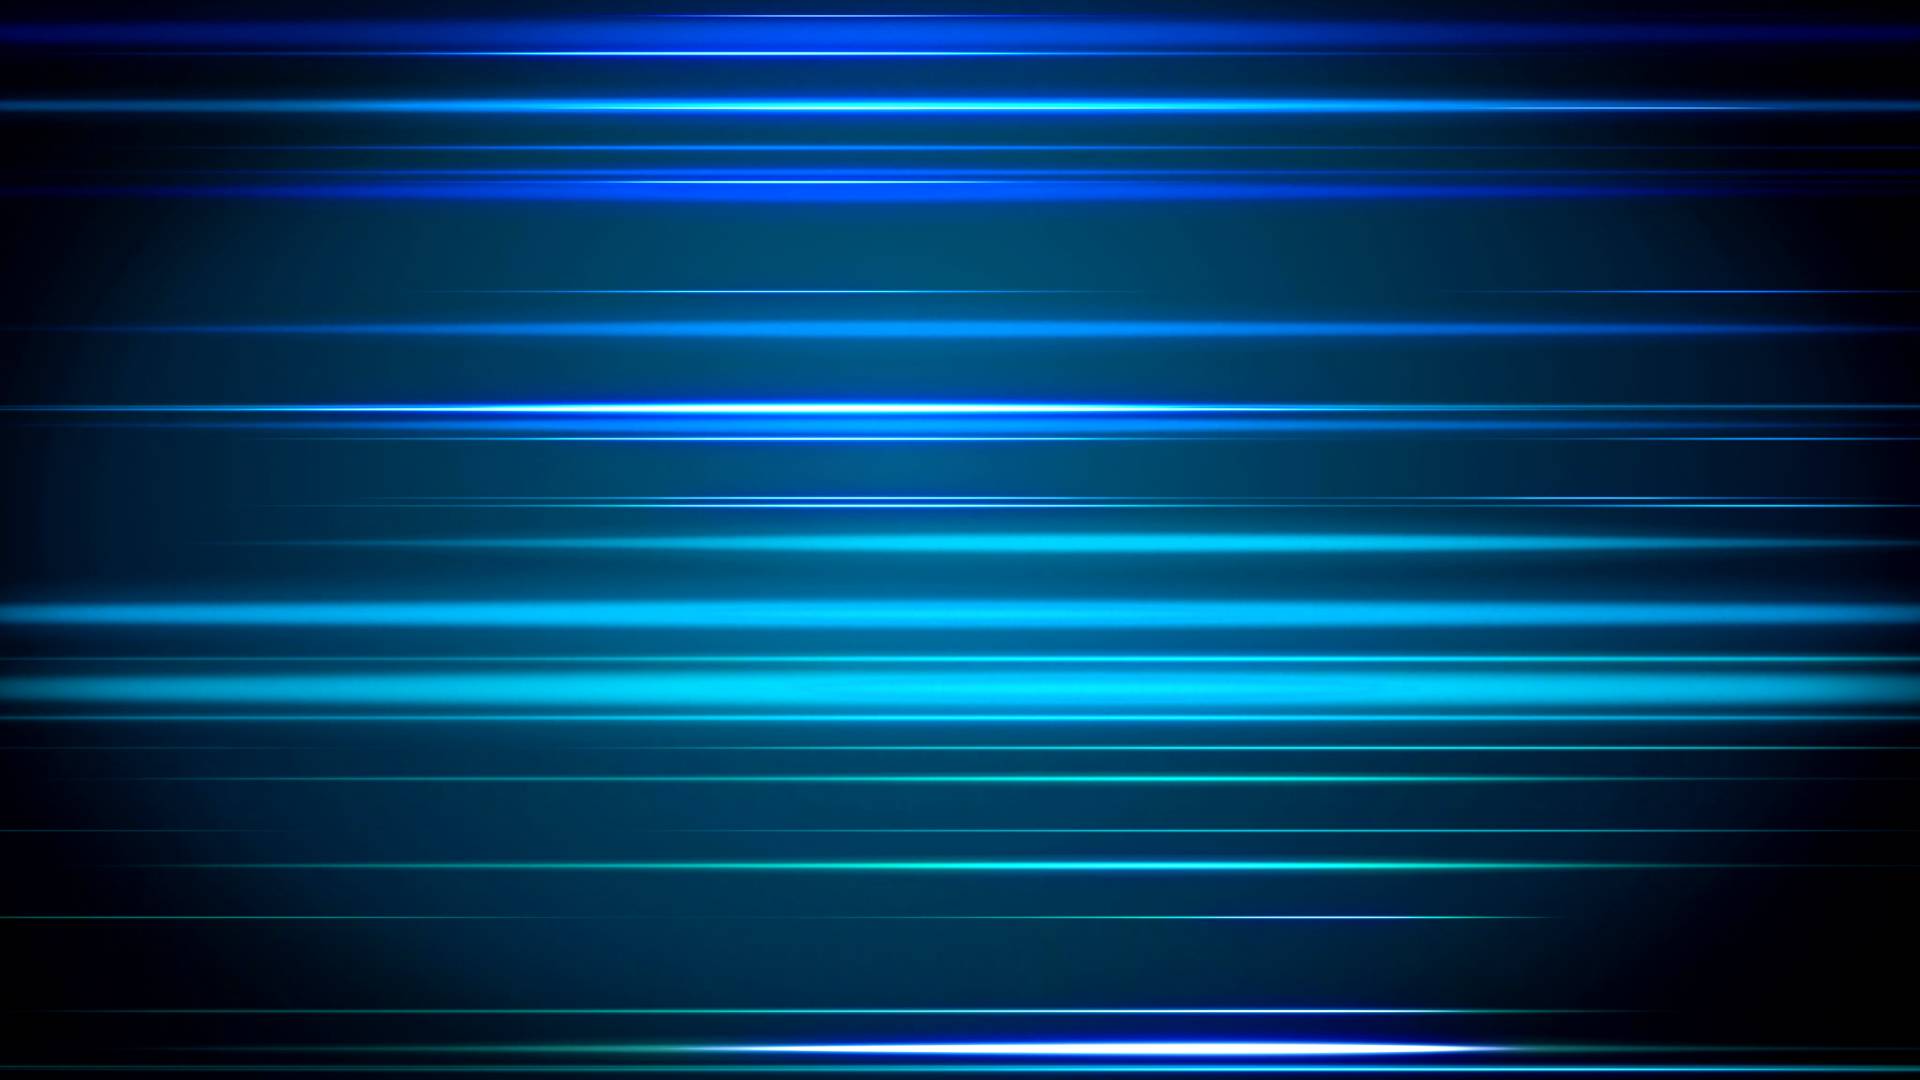 Light blue horizontal lines on a blue background. - YouTube